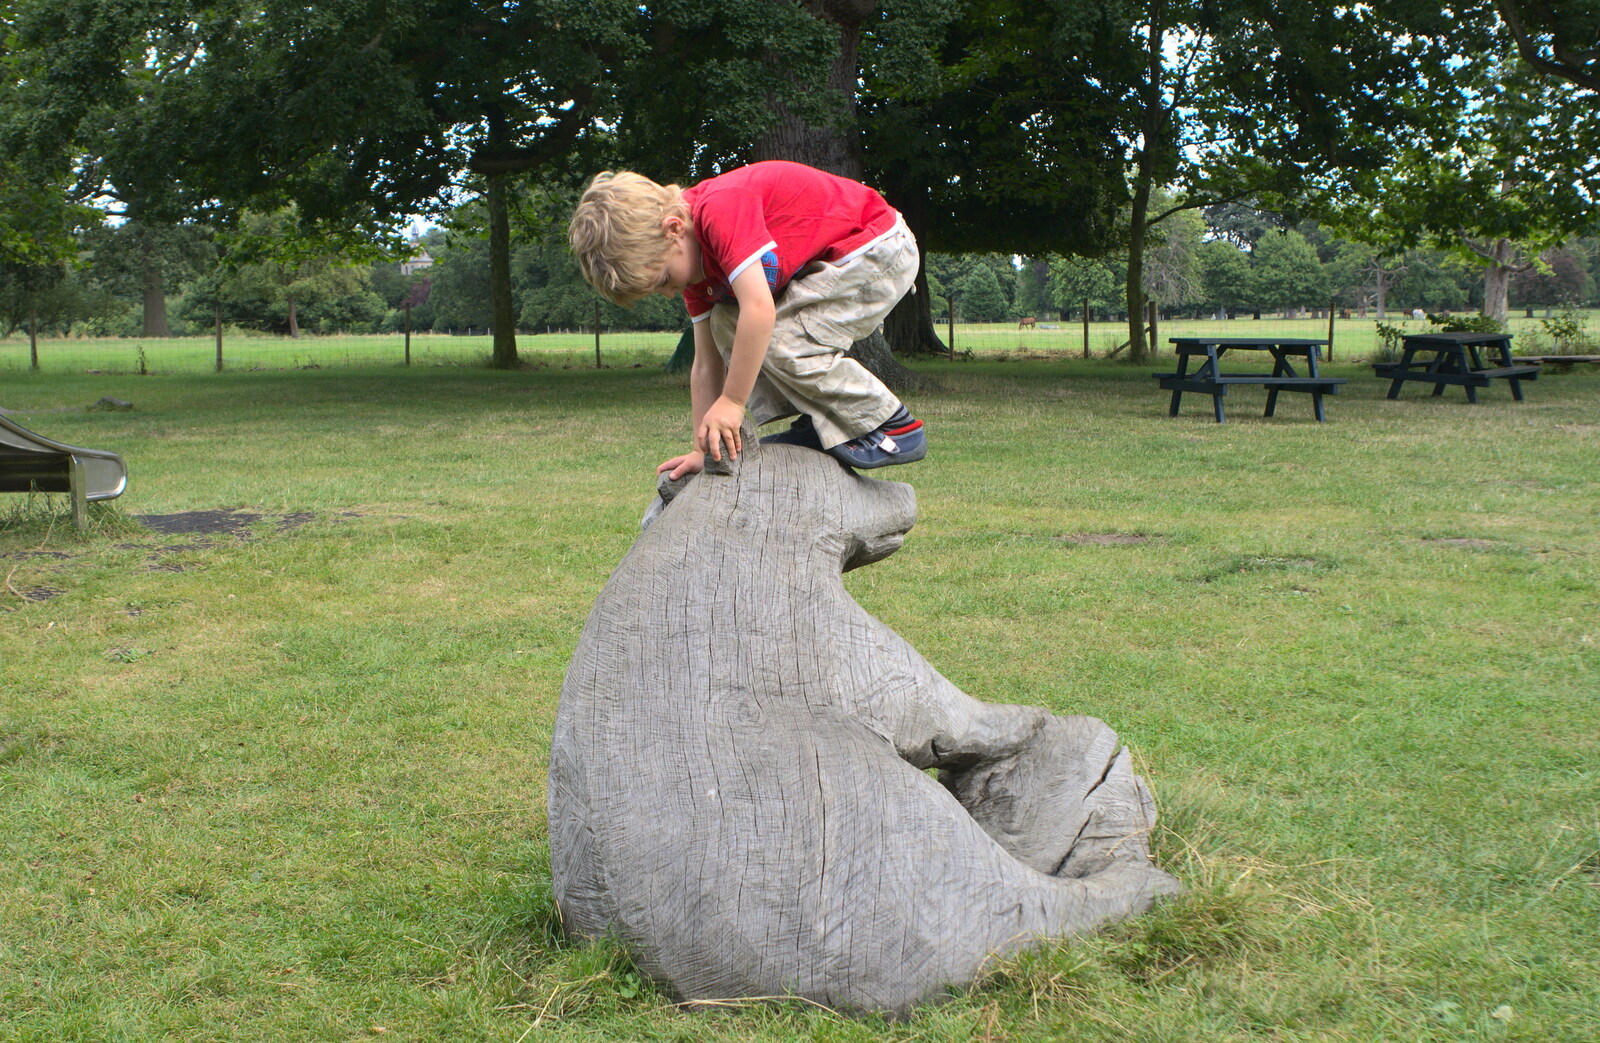 Fred climbs on a bear from A Giant Sand Pile, and a Walk at Thornham, Suffolk - 17th August 2013